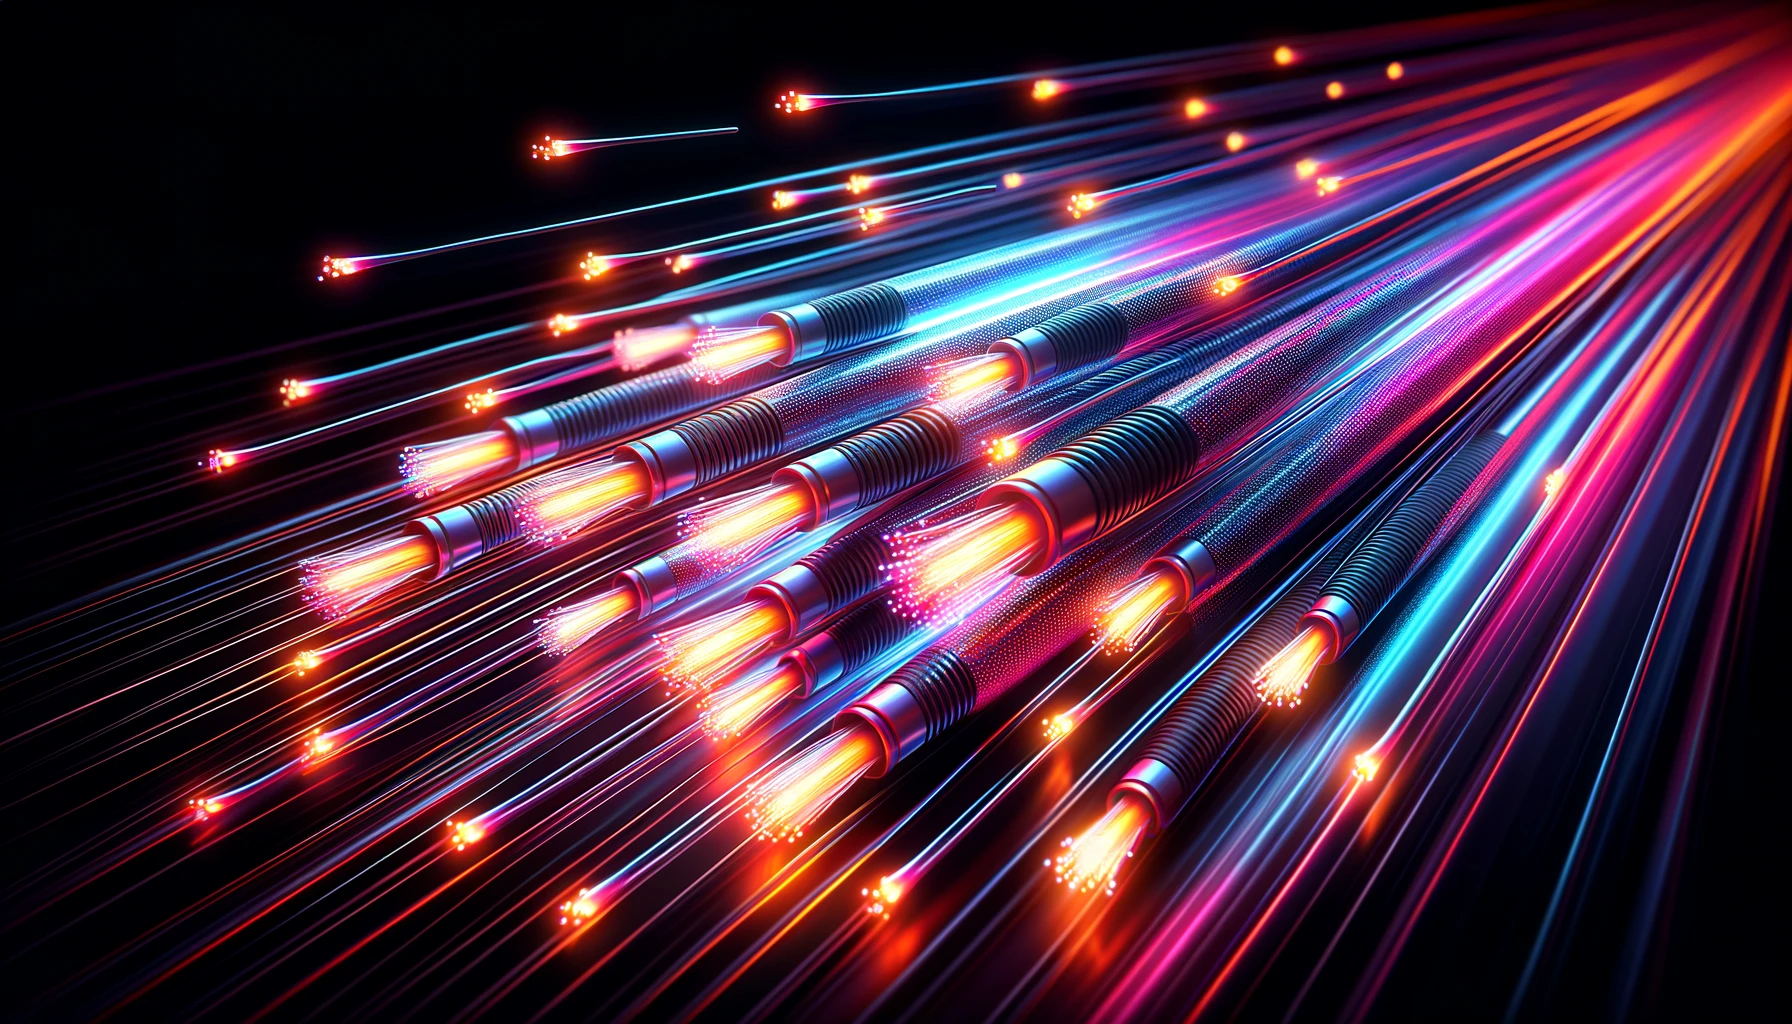 An image depicting fiber optic cables with bright, neon lights running along the cables, symbolizing fast data flow.